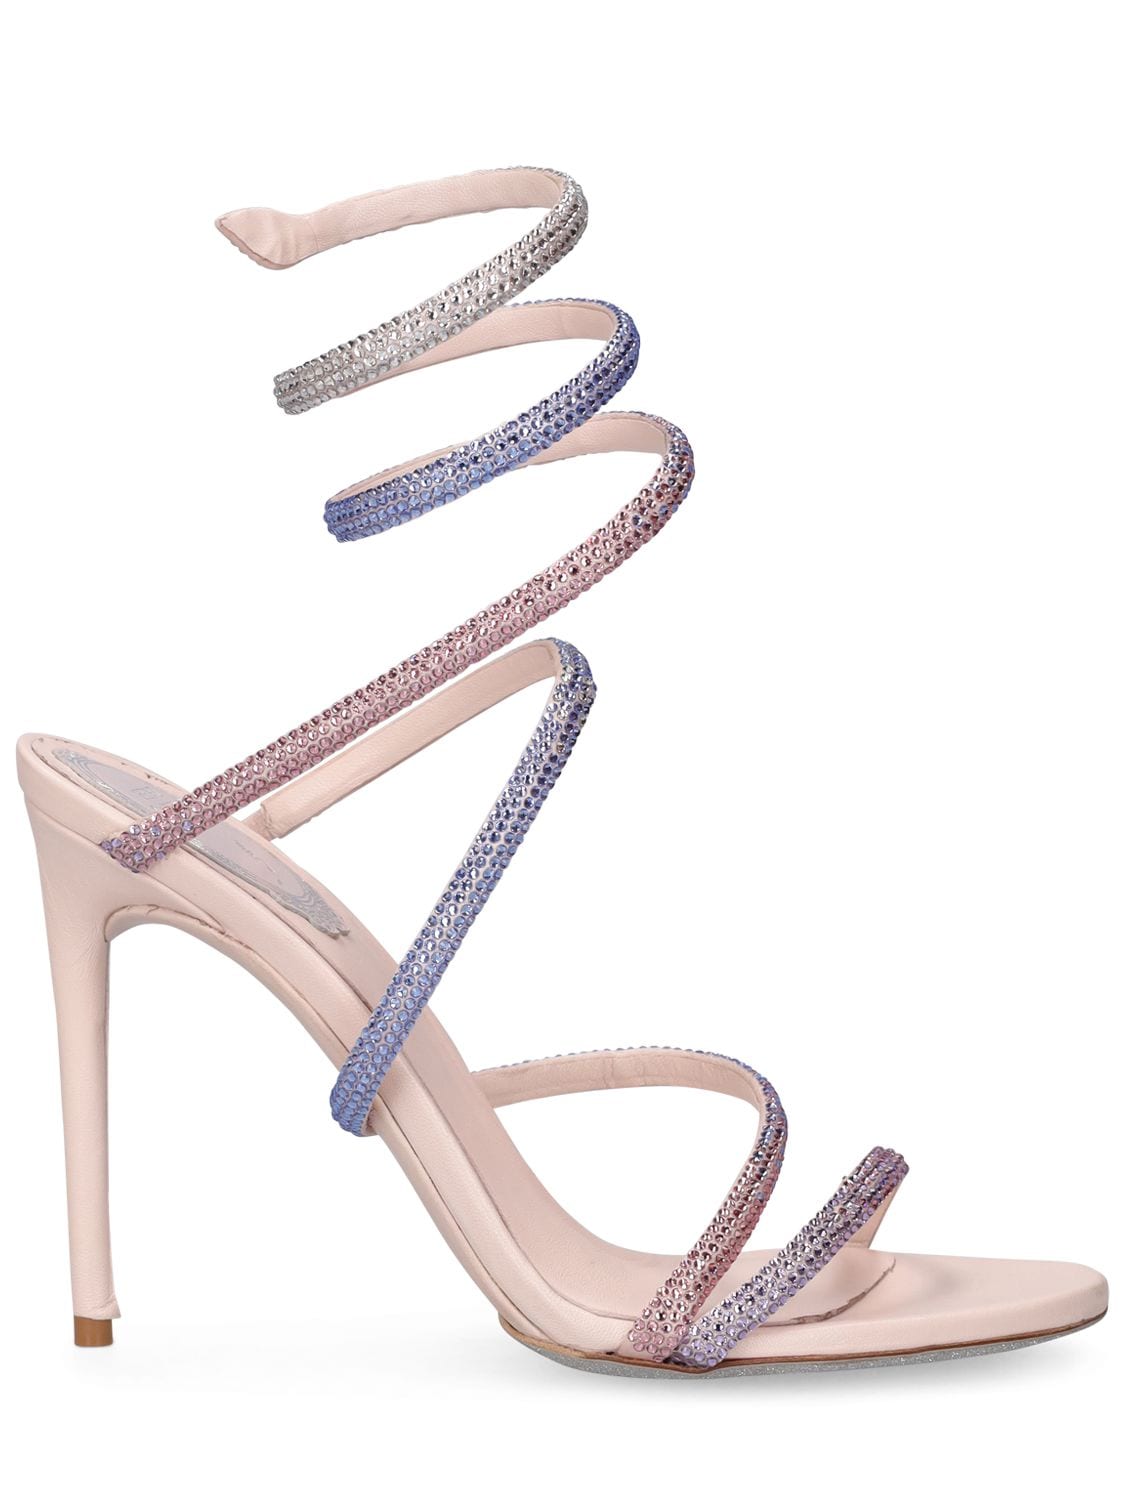 René Caovilla 105mm Embellished Leather Sandals In Pink,multi